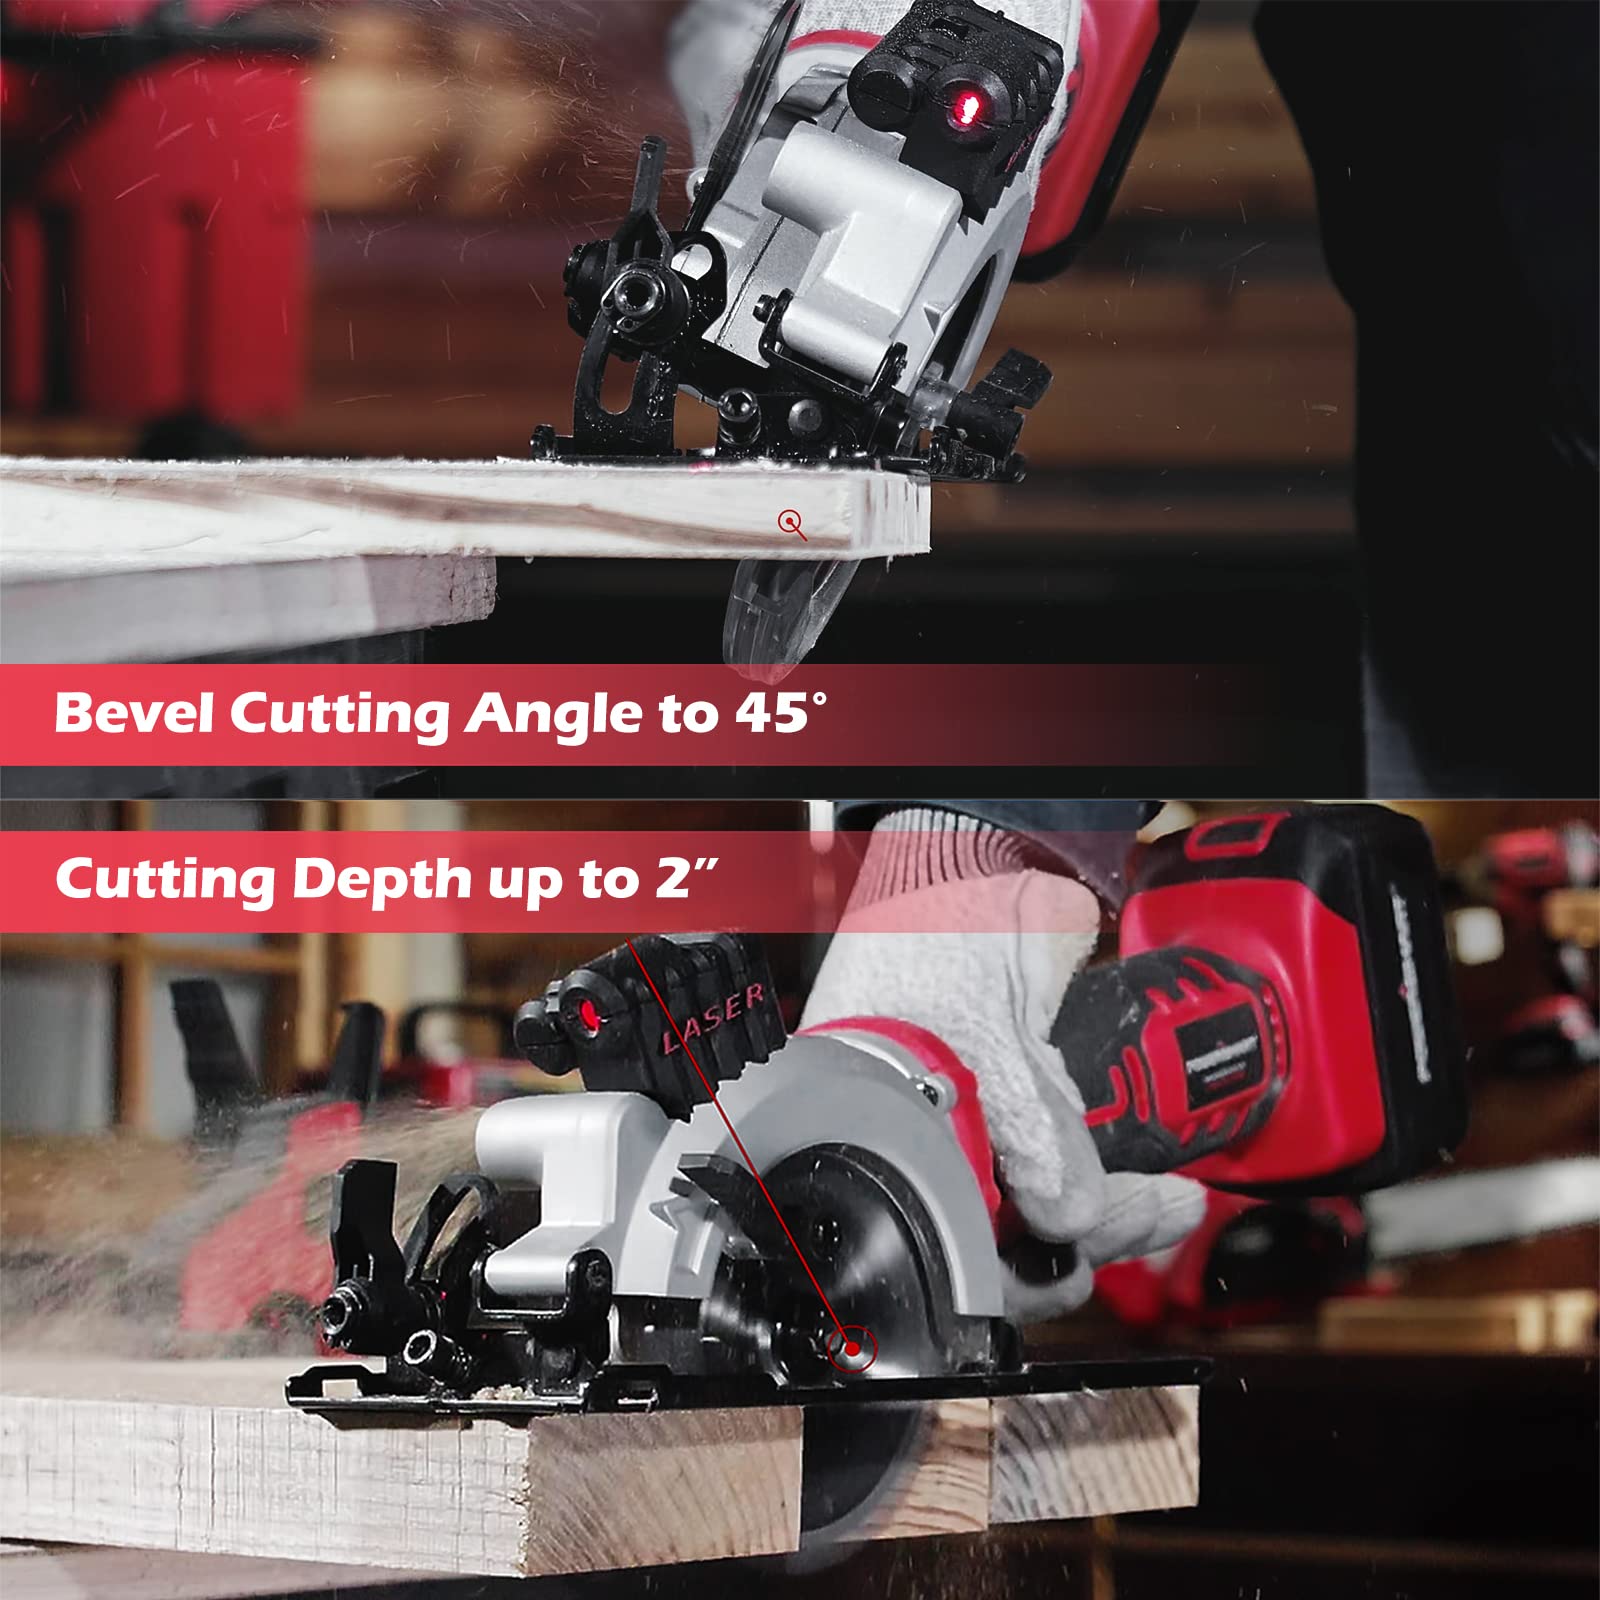 PowerSmart 20V 4-1/2 Inch Cordless Mini Circular Saw Includes 4.0Ah Battery and Charger, Saw Blades for Wood, Soft Metal and Tile Cutting